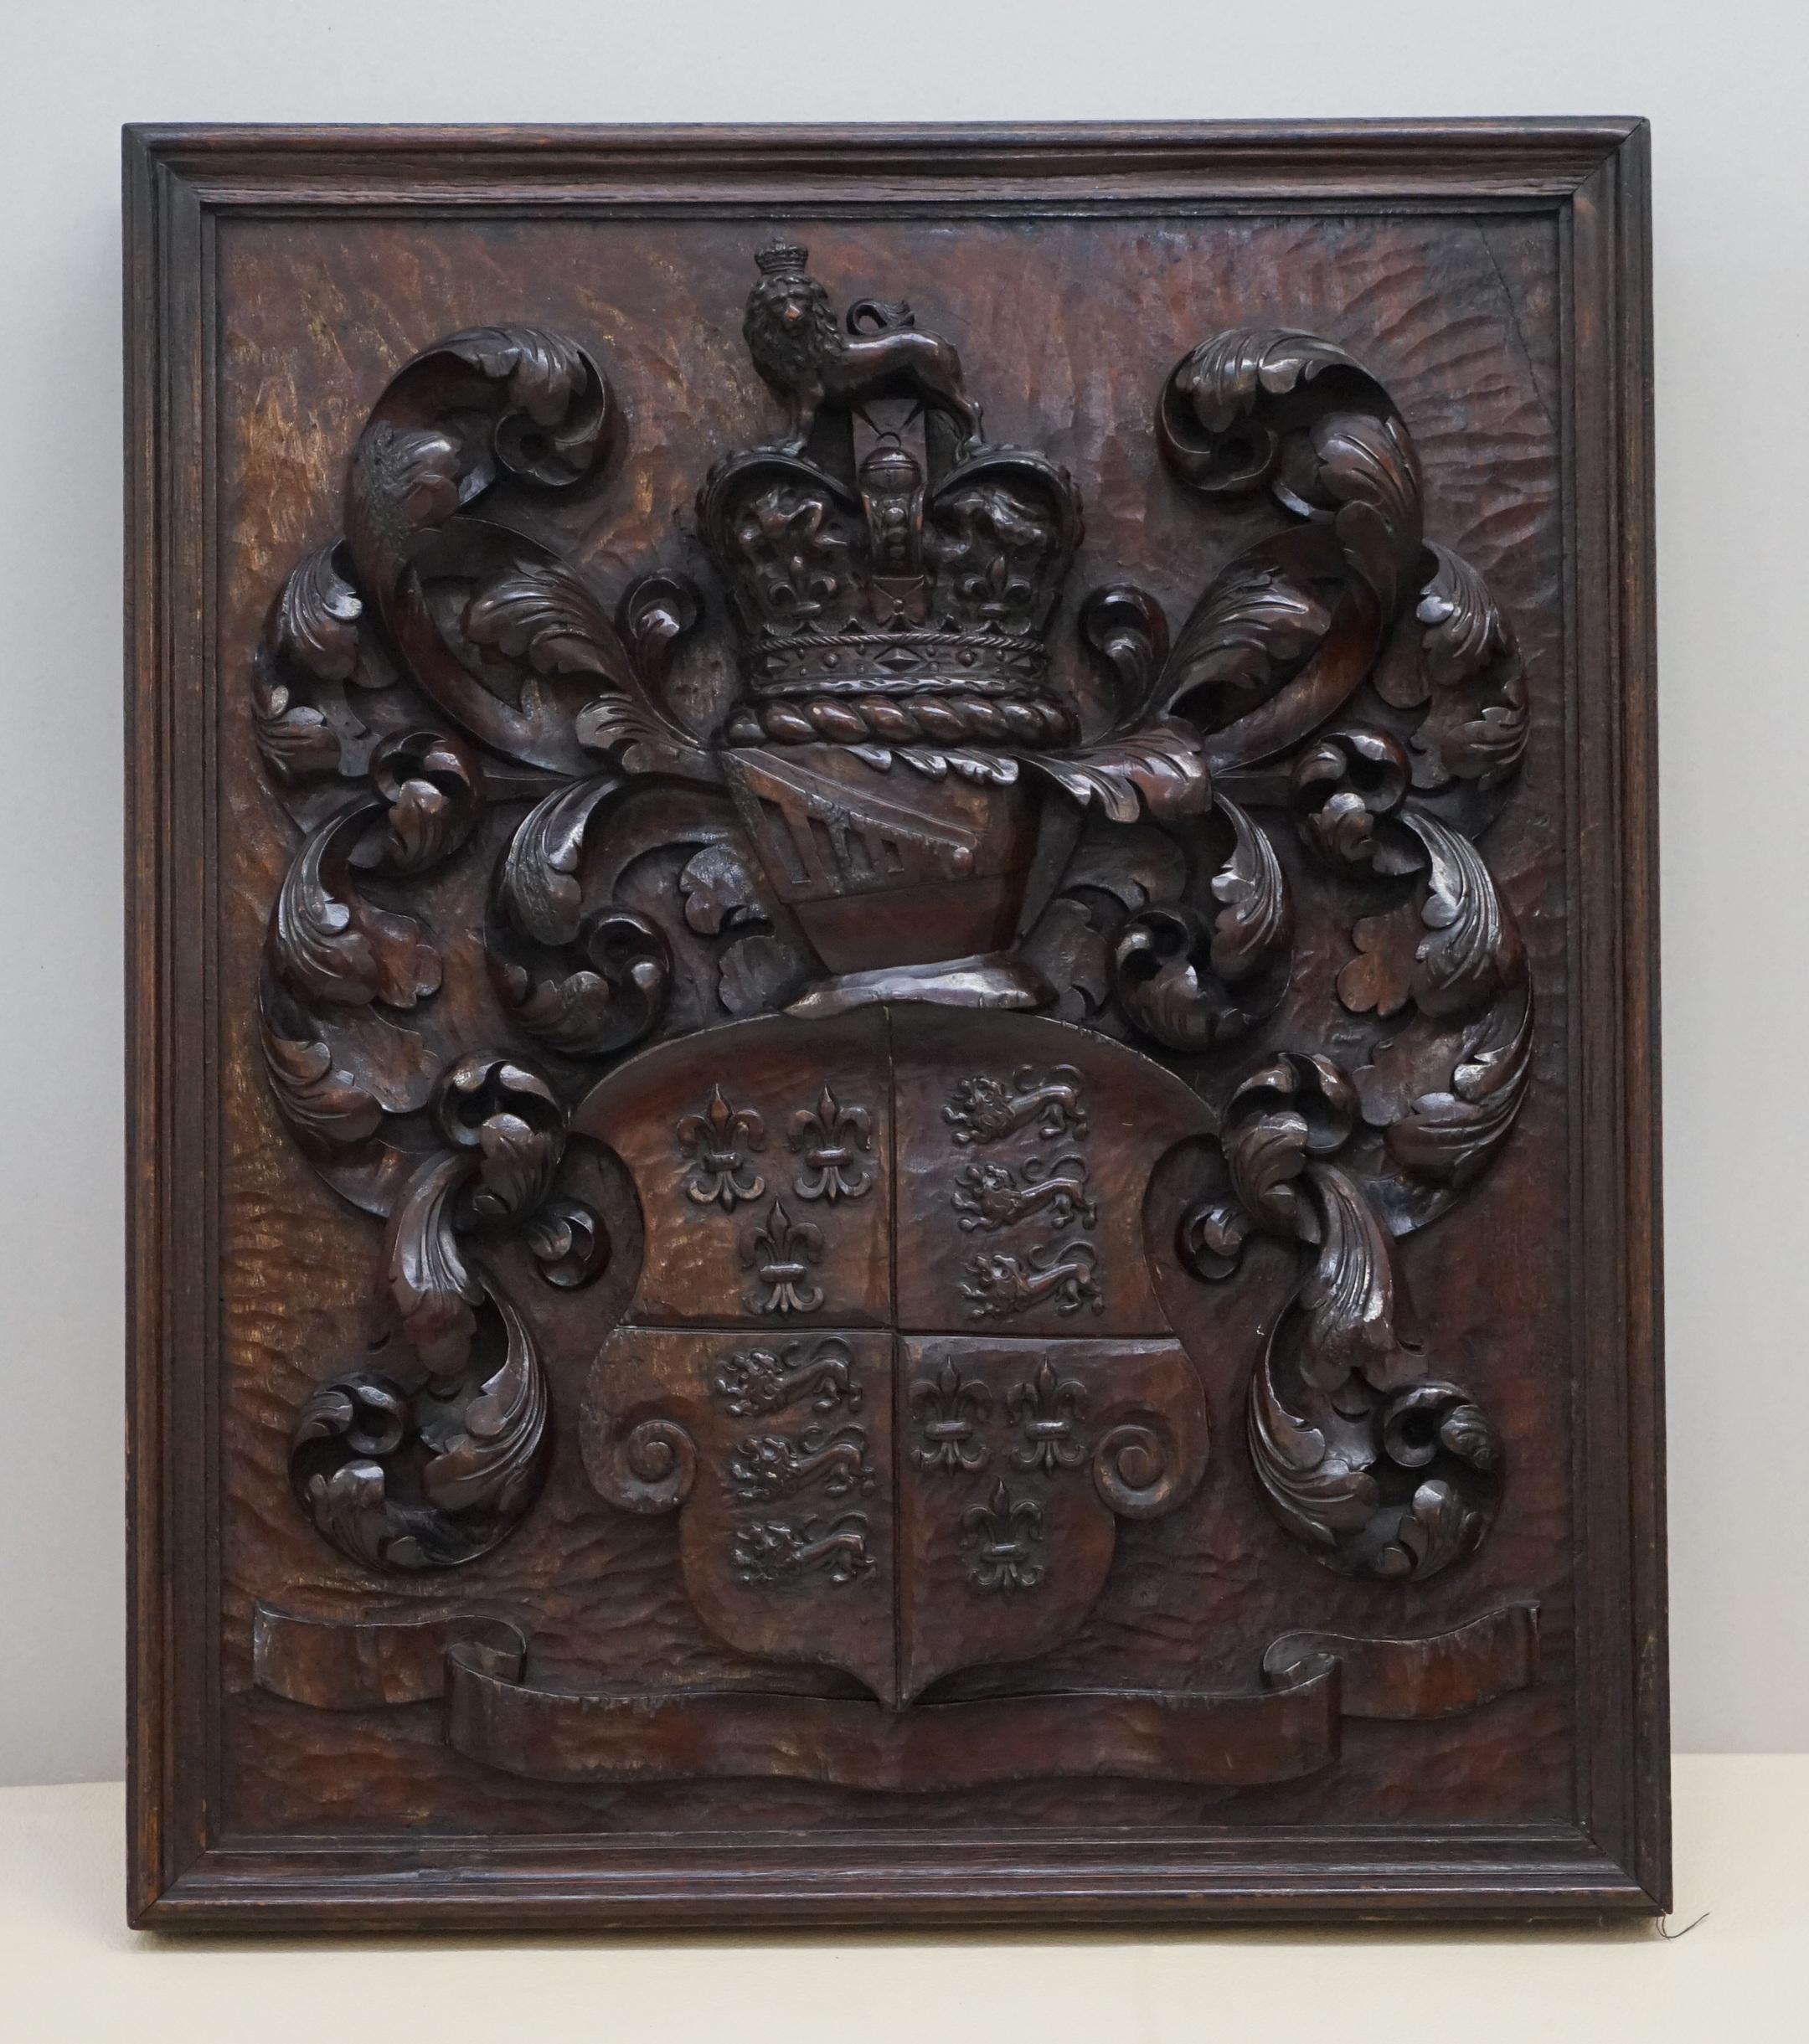 Royal House Antiques

Royal House Antiques is delighted to offer for sale this stunning and very rare English Armorial Crest coat of arms that covers a period of 1405-1603 hand carved in solid walnut dating to circa 1780.

A truly sublime piece, I